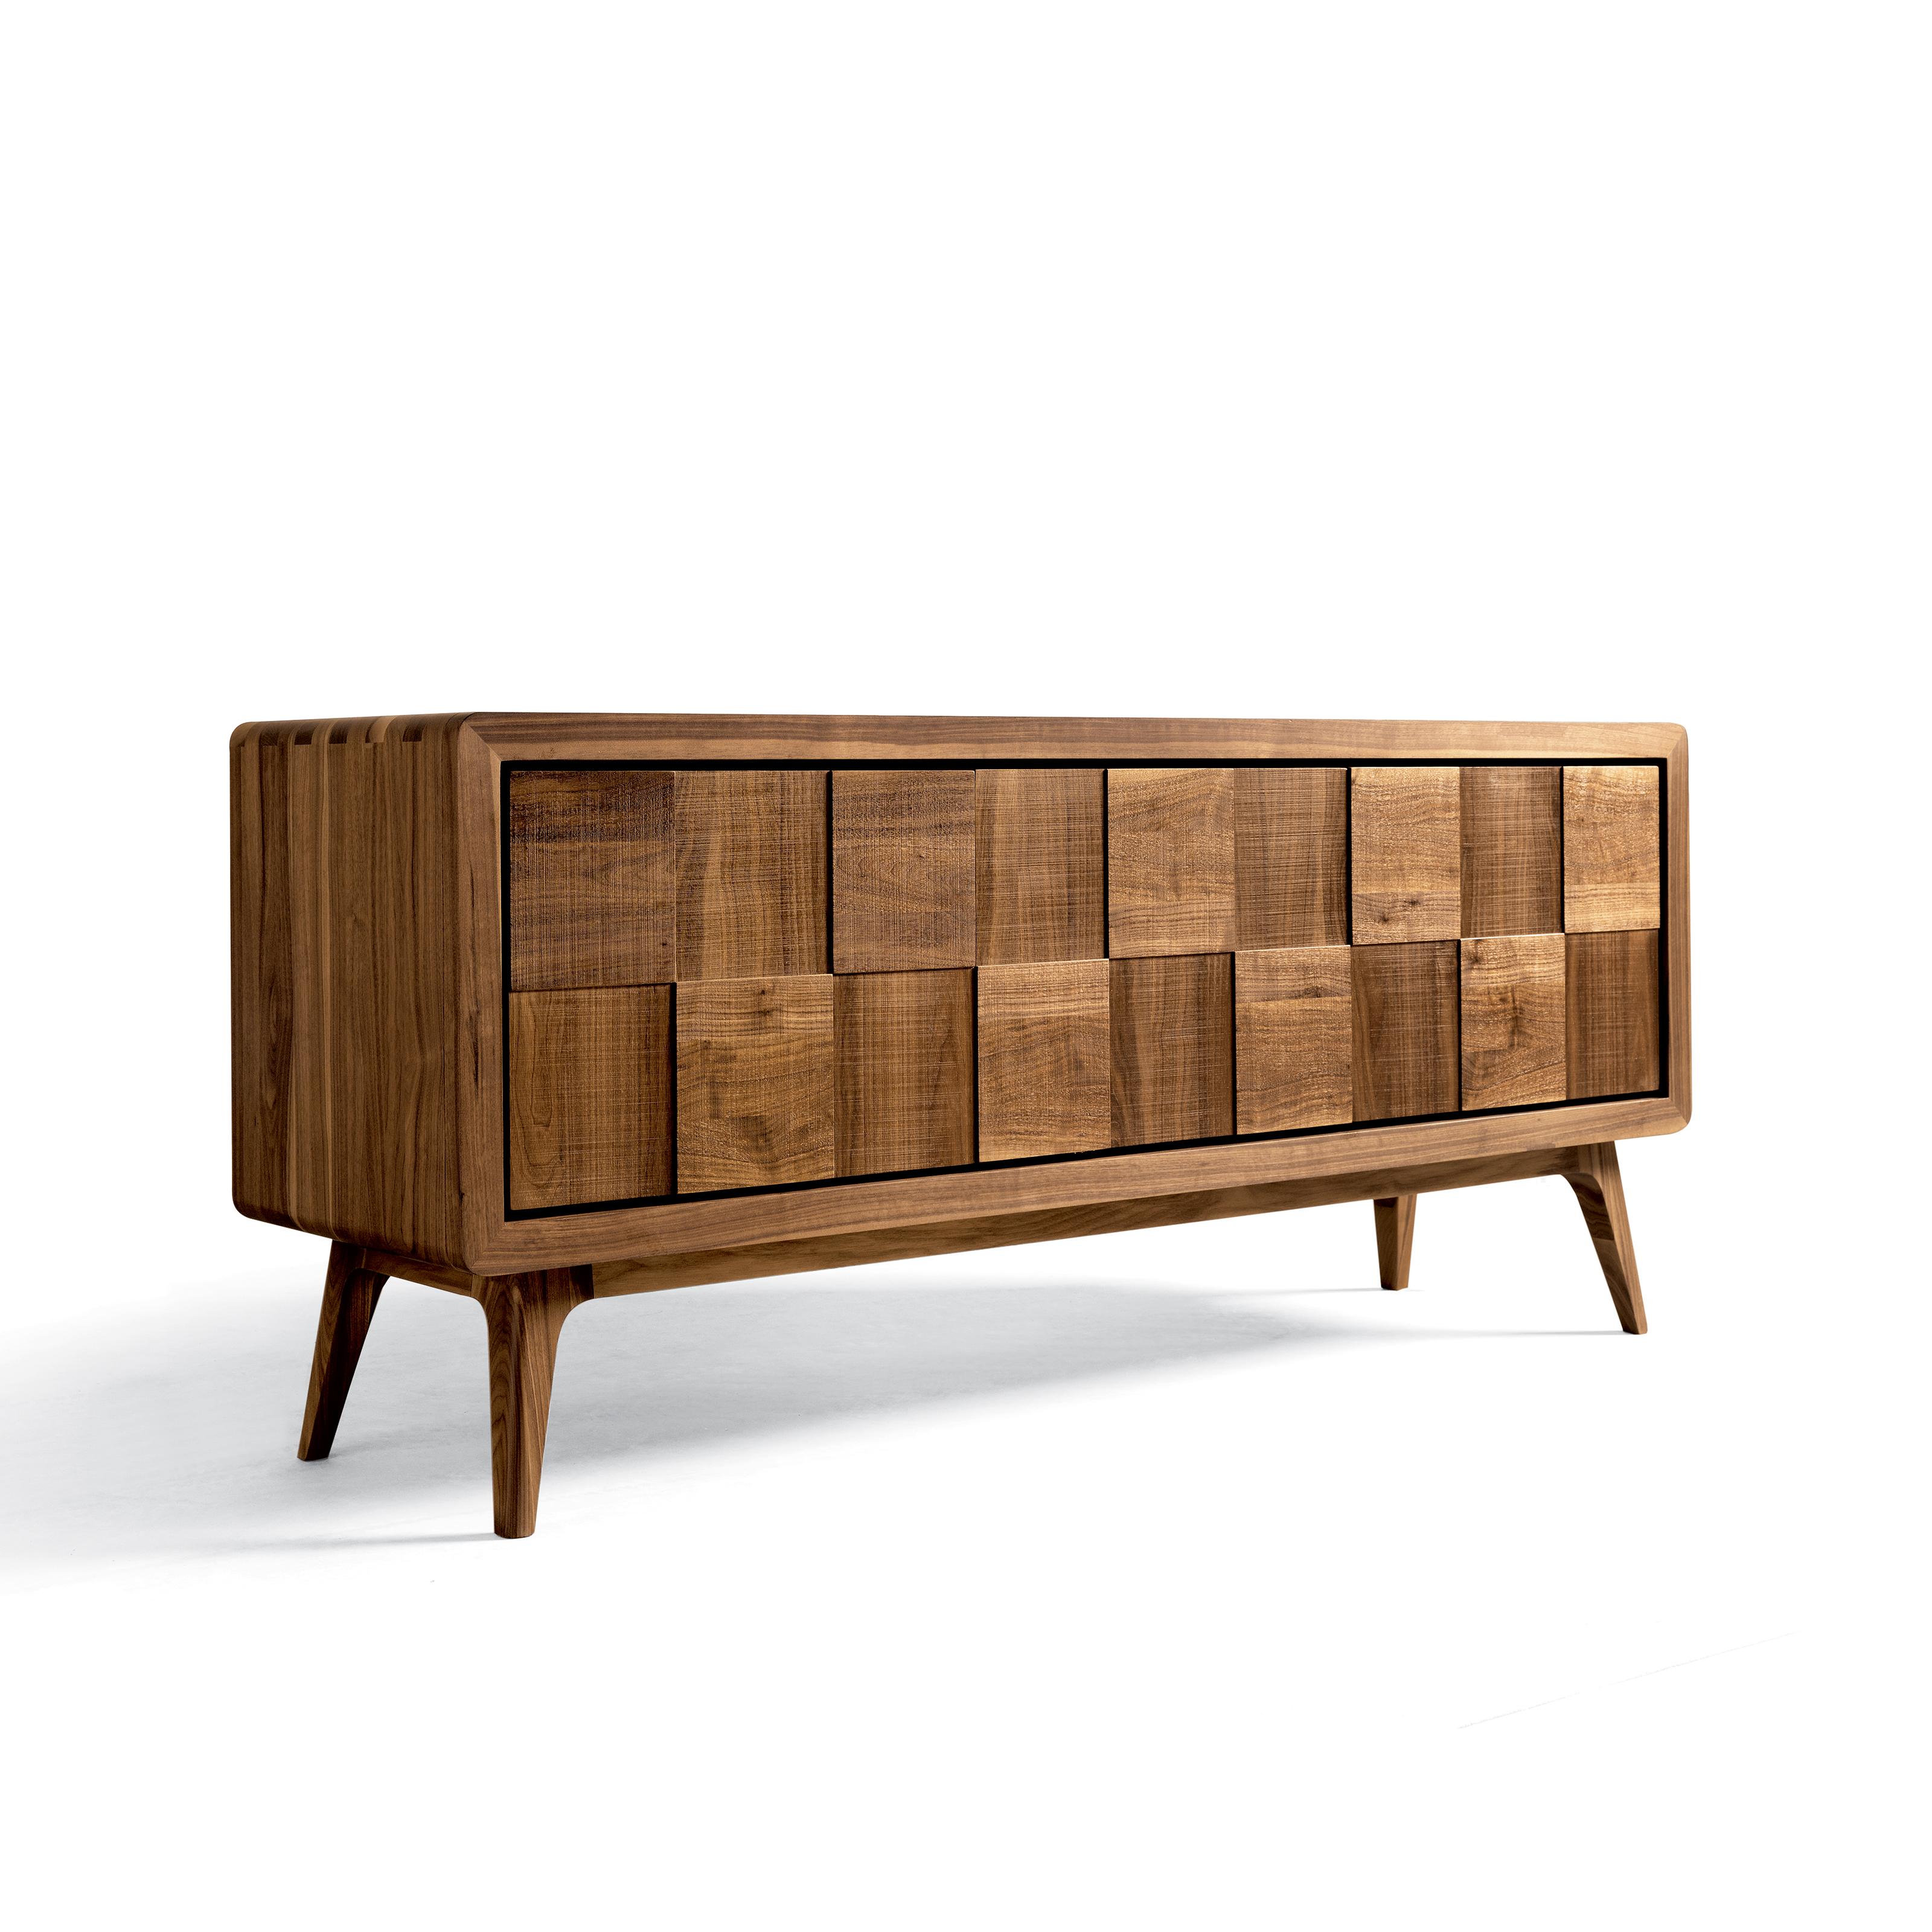 A stunning sideboard that combines fine Italian design with exceptional craftsmanship. Made of premium solid walnut in natural oil finish, it’s a timeless piece perfect for elegant and contemporary interior design. It comes with 3 doors and internal